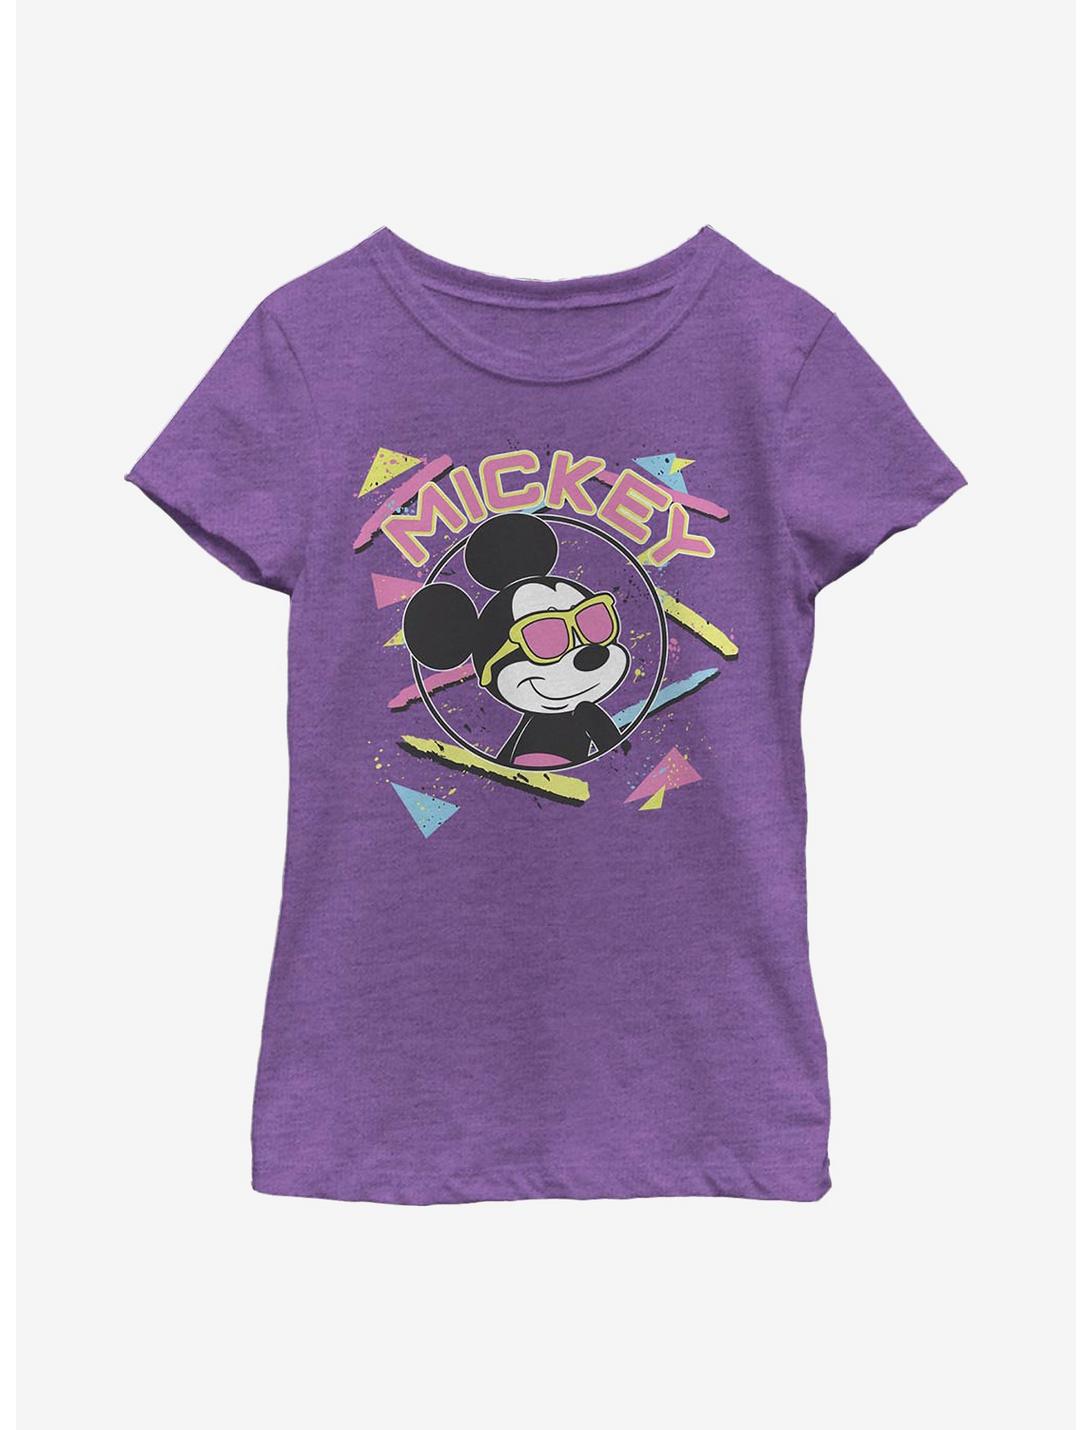 Disney Mickey Mouse 90's Mickey Youth Girls T-Shirt, PURPLE BERRY, hi-res